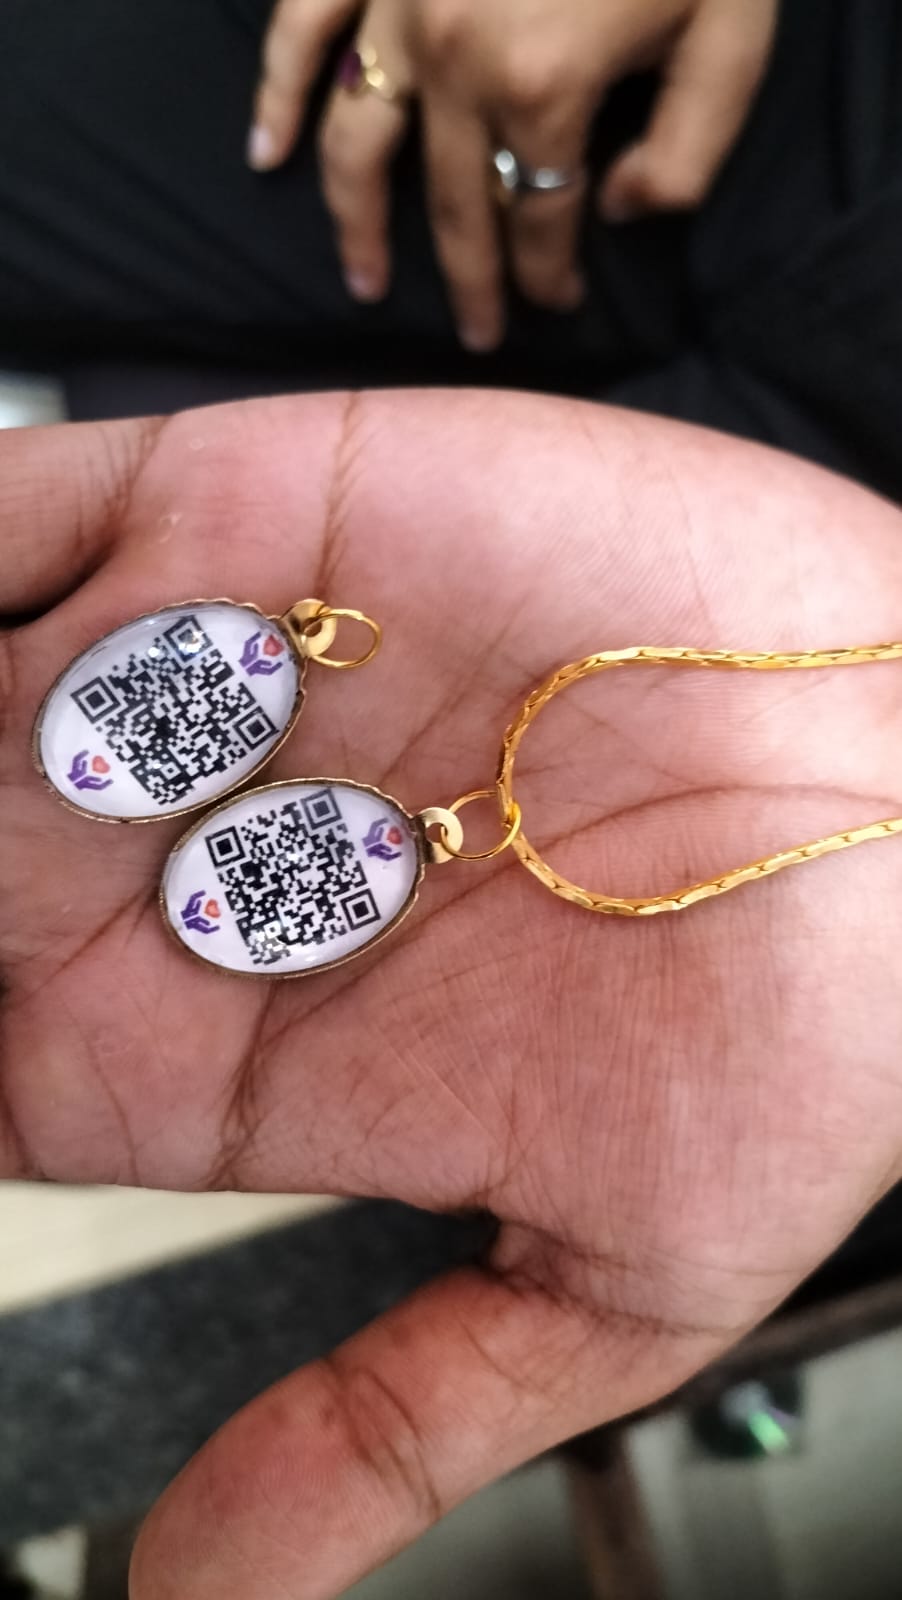 A QR code-enabled pendant for those with autism, Alzheimer’s? Meet the data engineer behind Project Chetna